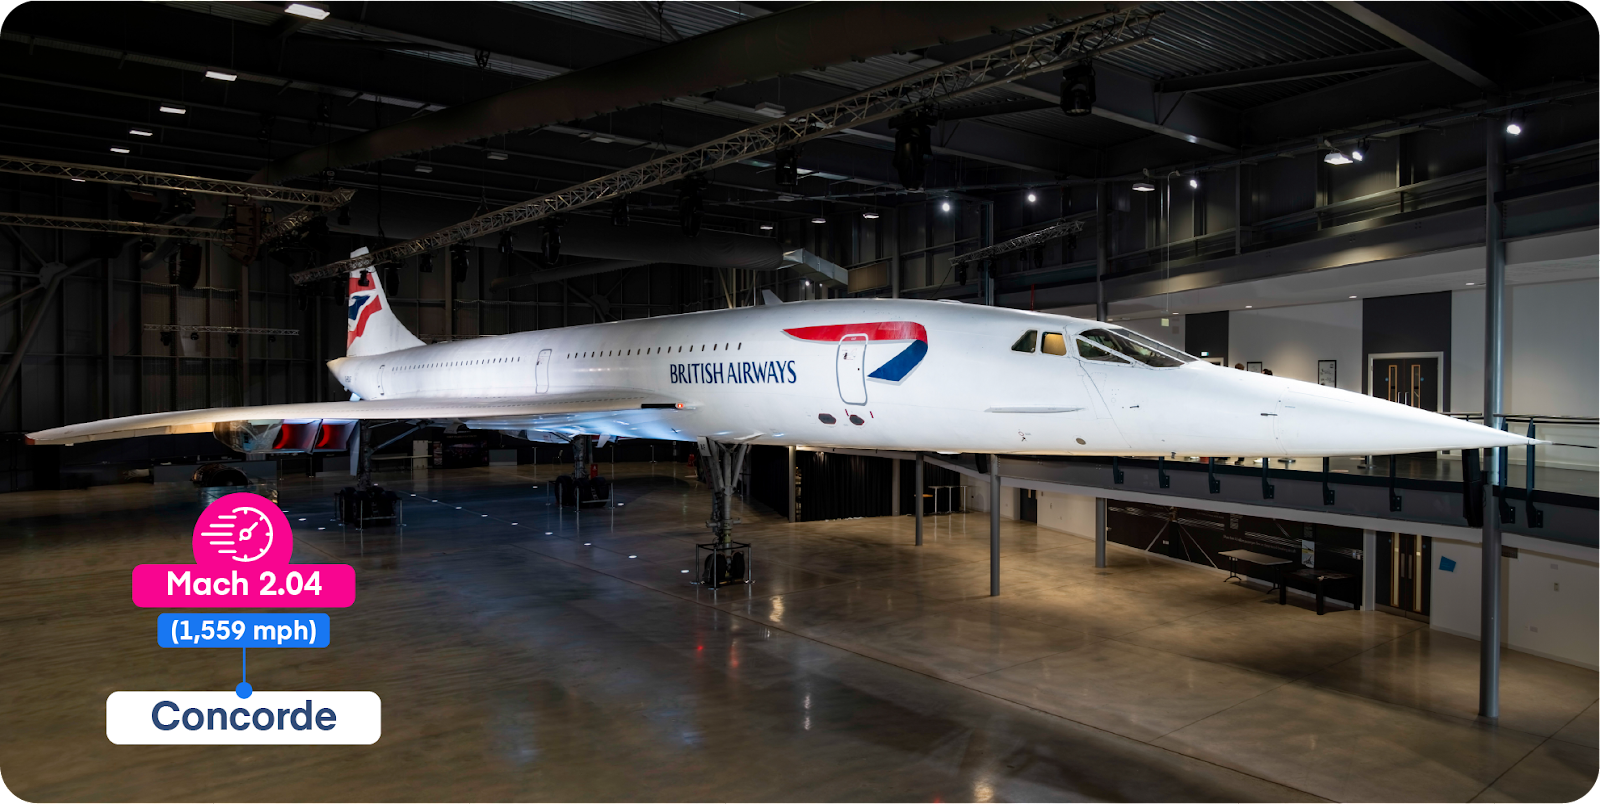 A picture of the Concorde.